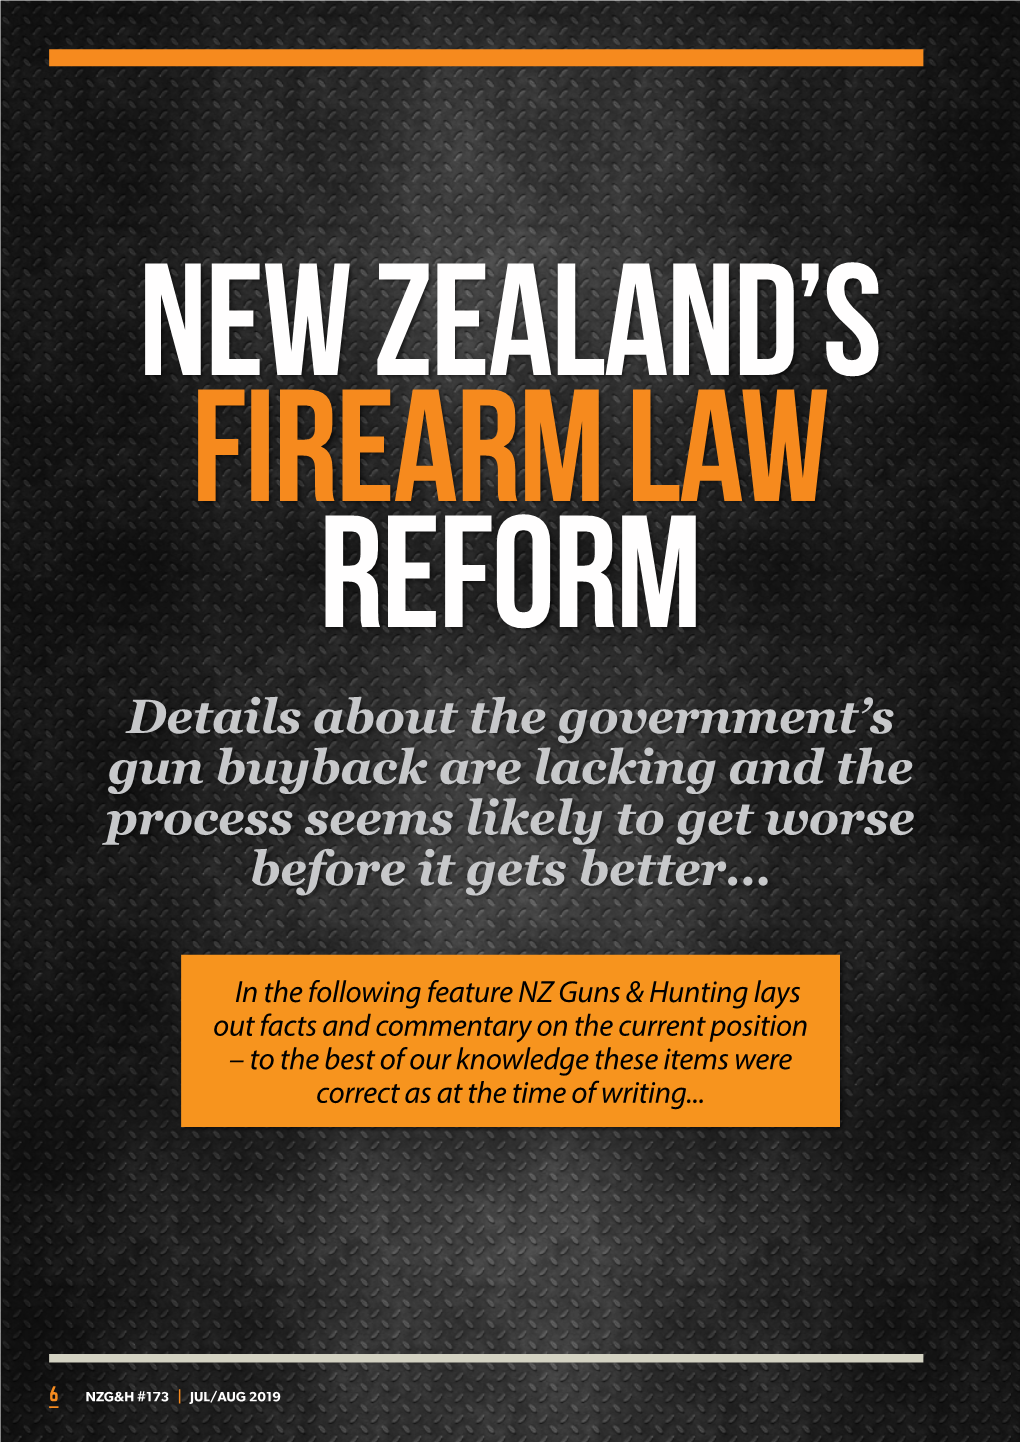 Details About the Government's Gun Buyback Are Lacking and The